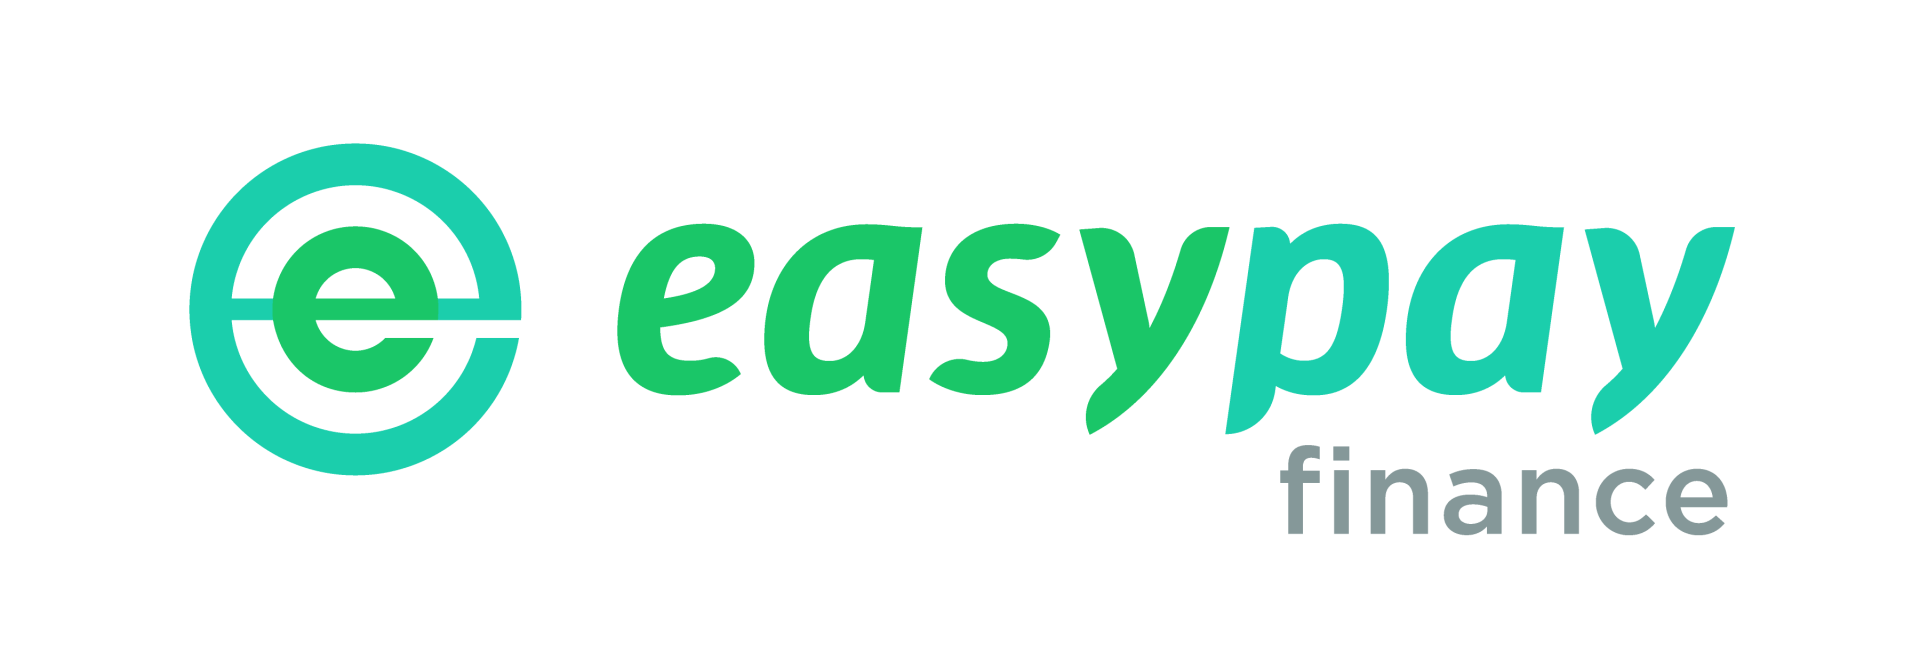 EasyPay Financing at David's Automotive Repair in The Colony, TX